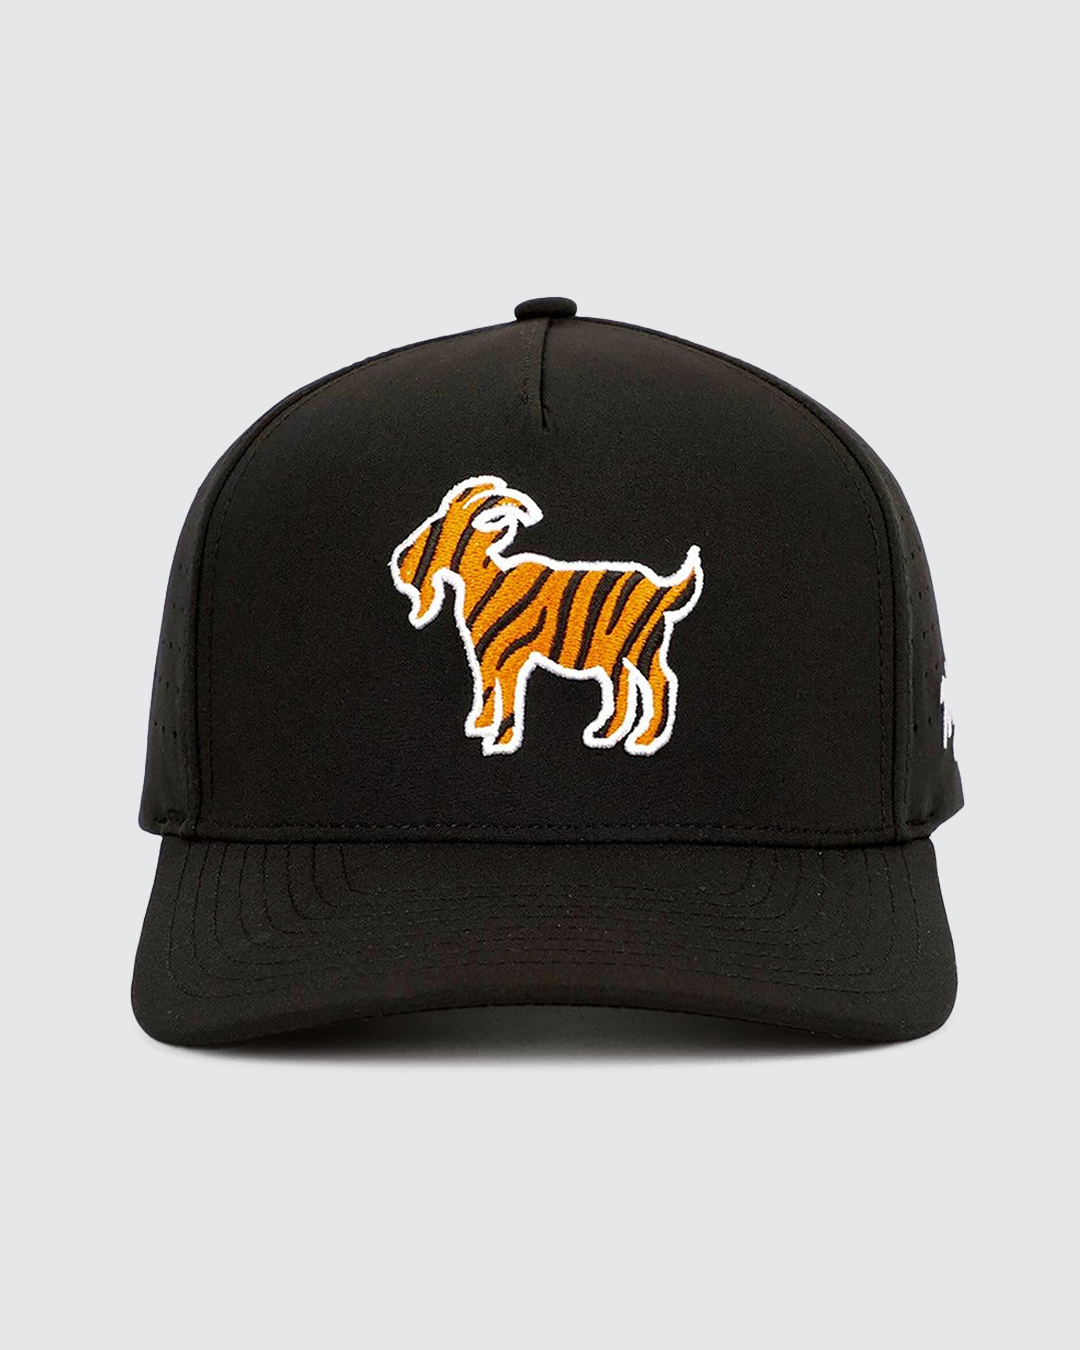 Waggle Golf Men's The Goat Hat, Black